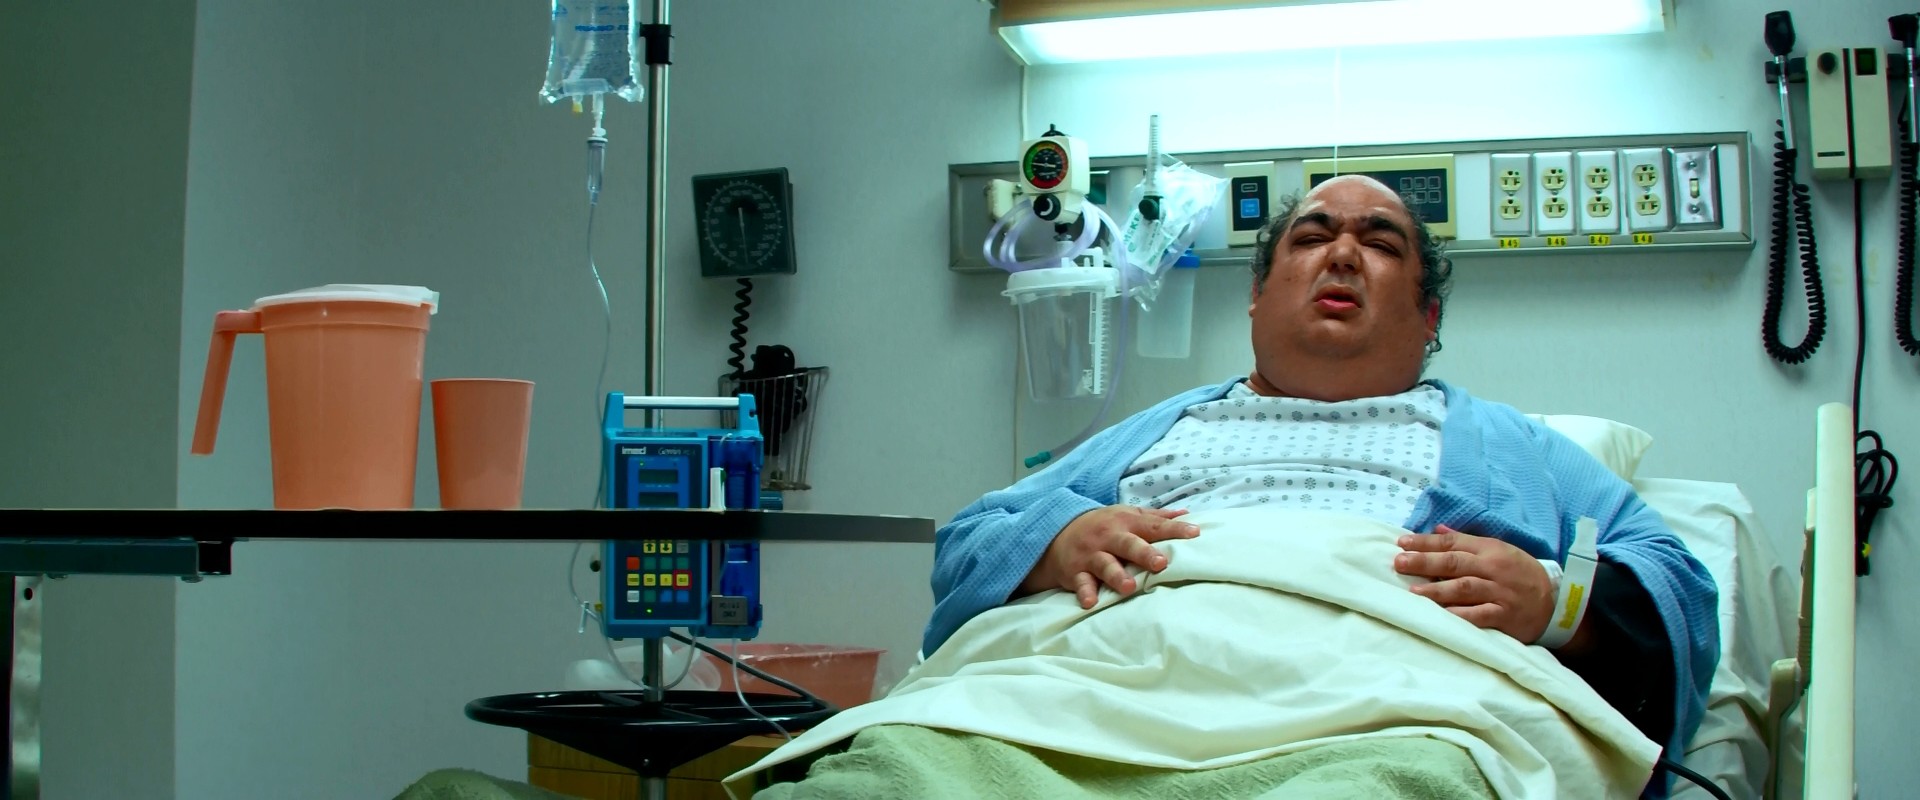 Mike Benitez as Patient Moaner from Pain & Gain.